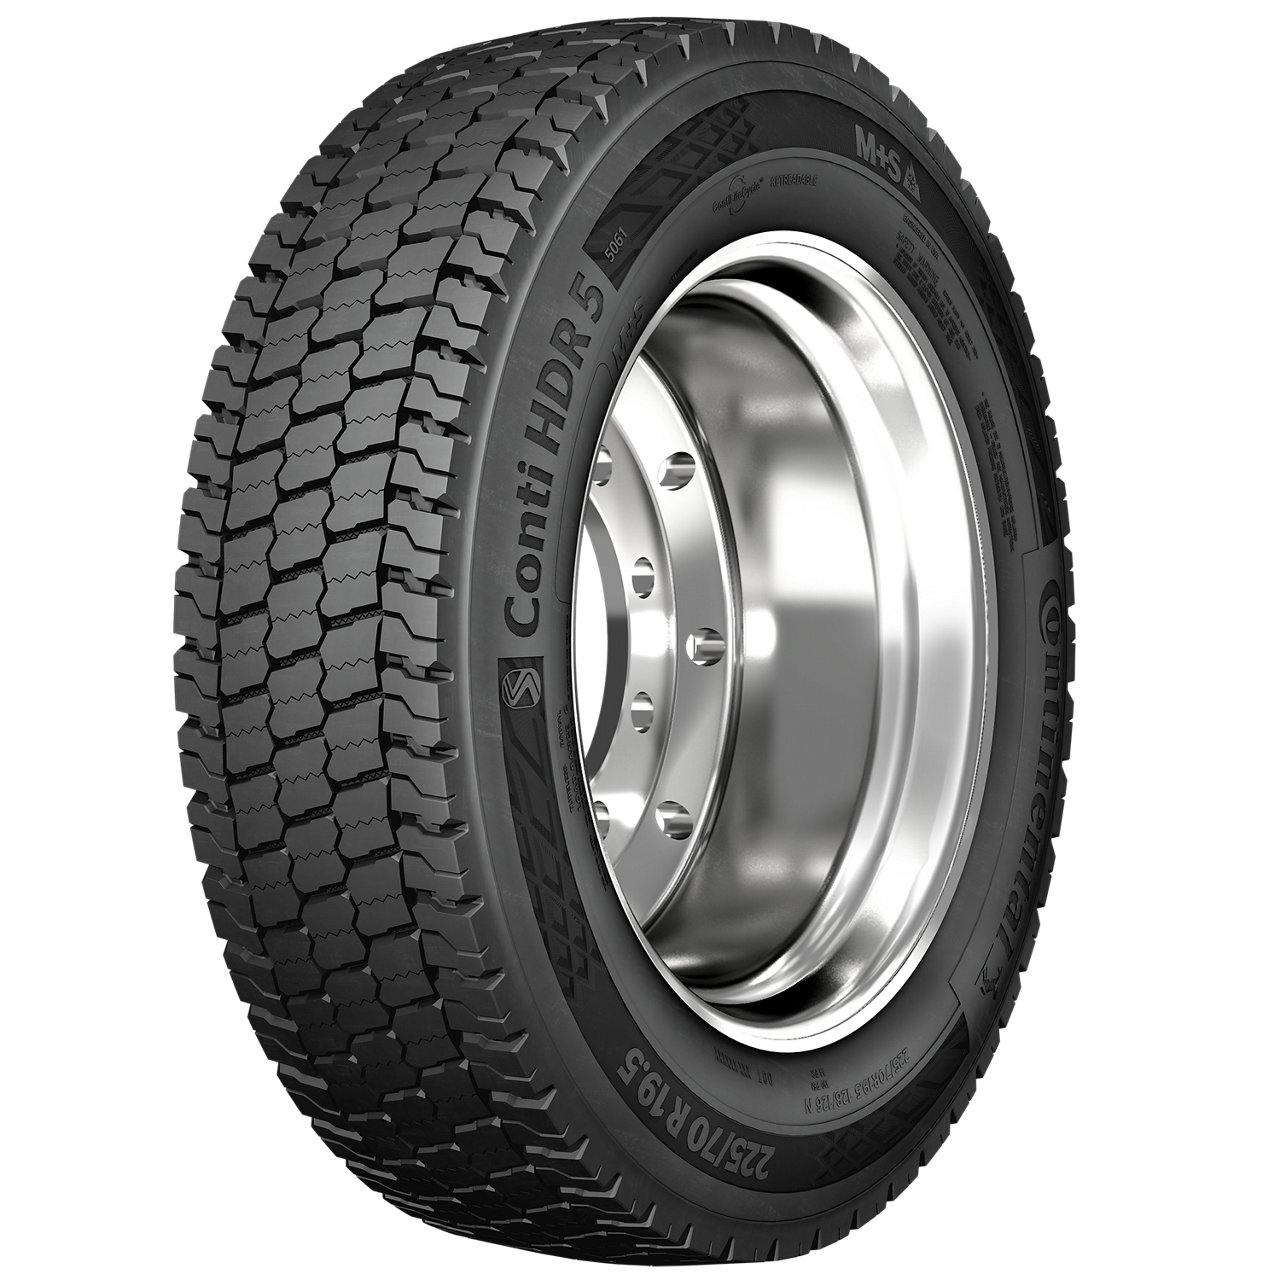 19.5" regional drive tire with an open shoulder tread design, improved rolling resistance, traction, wear and durability.